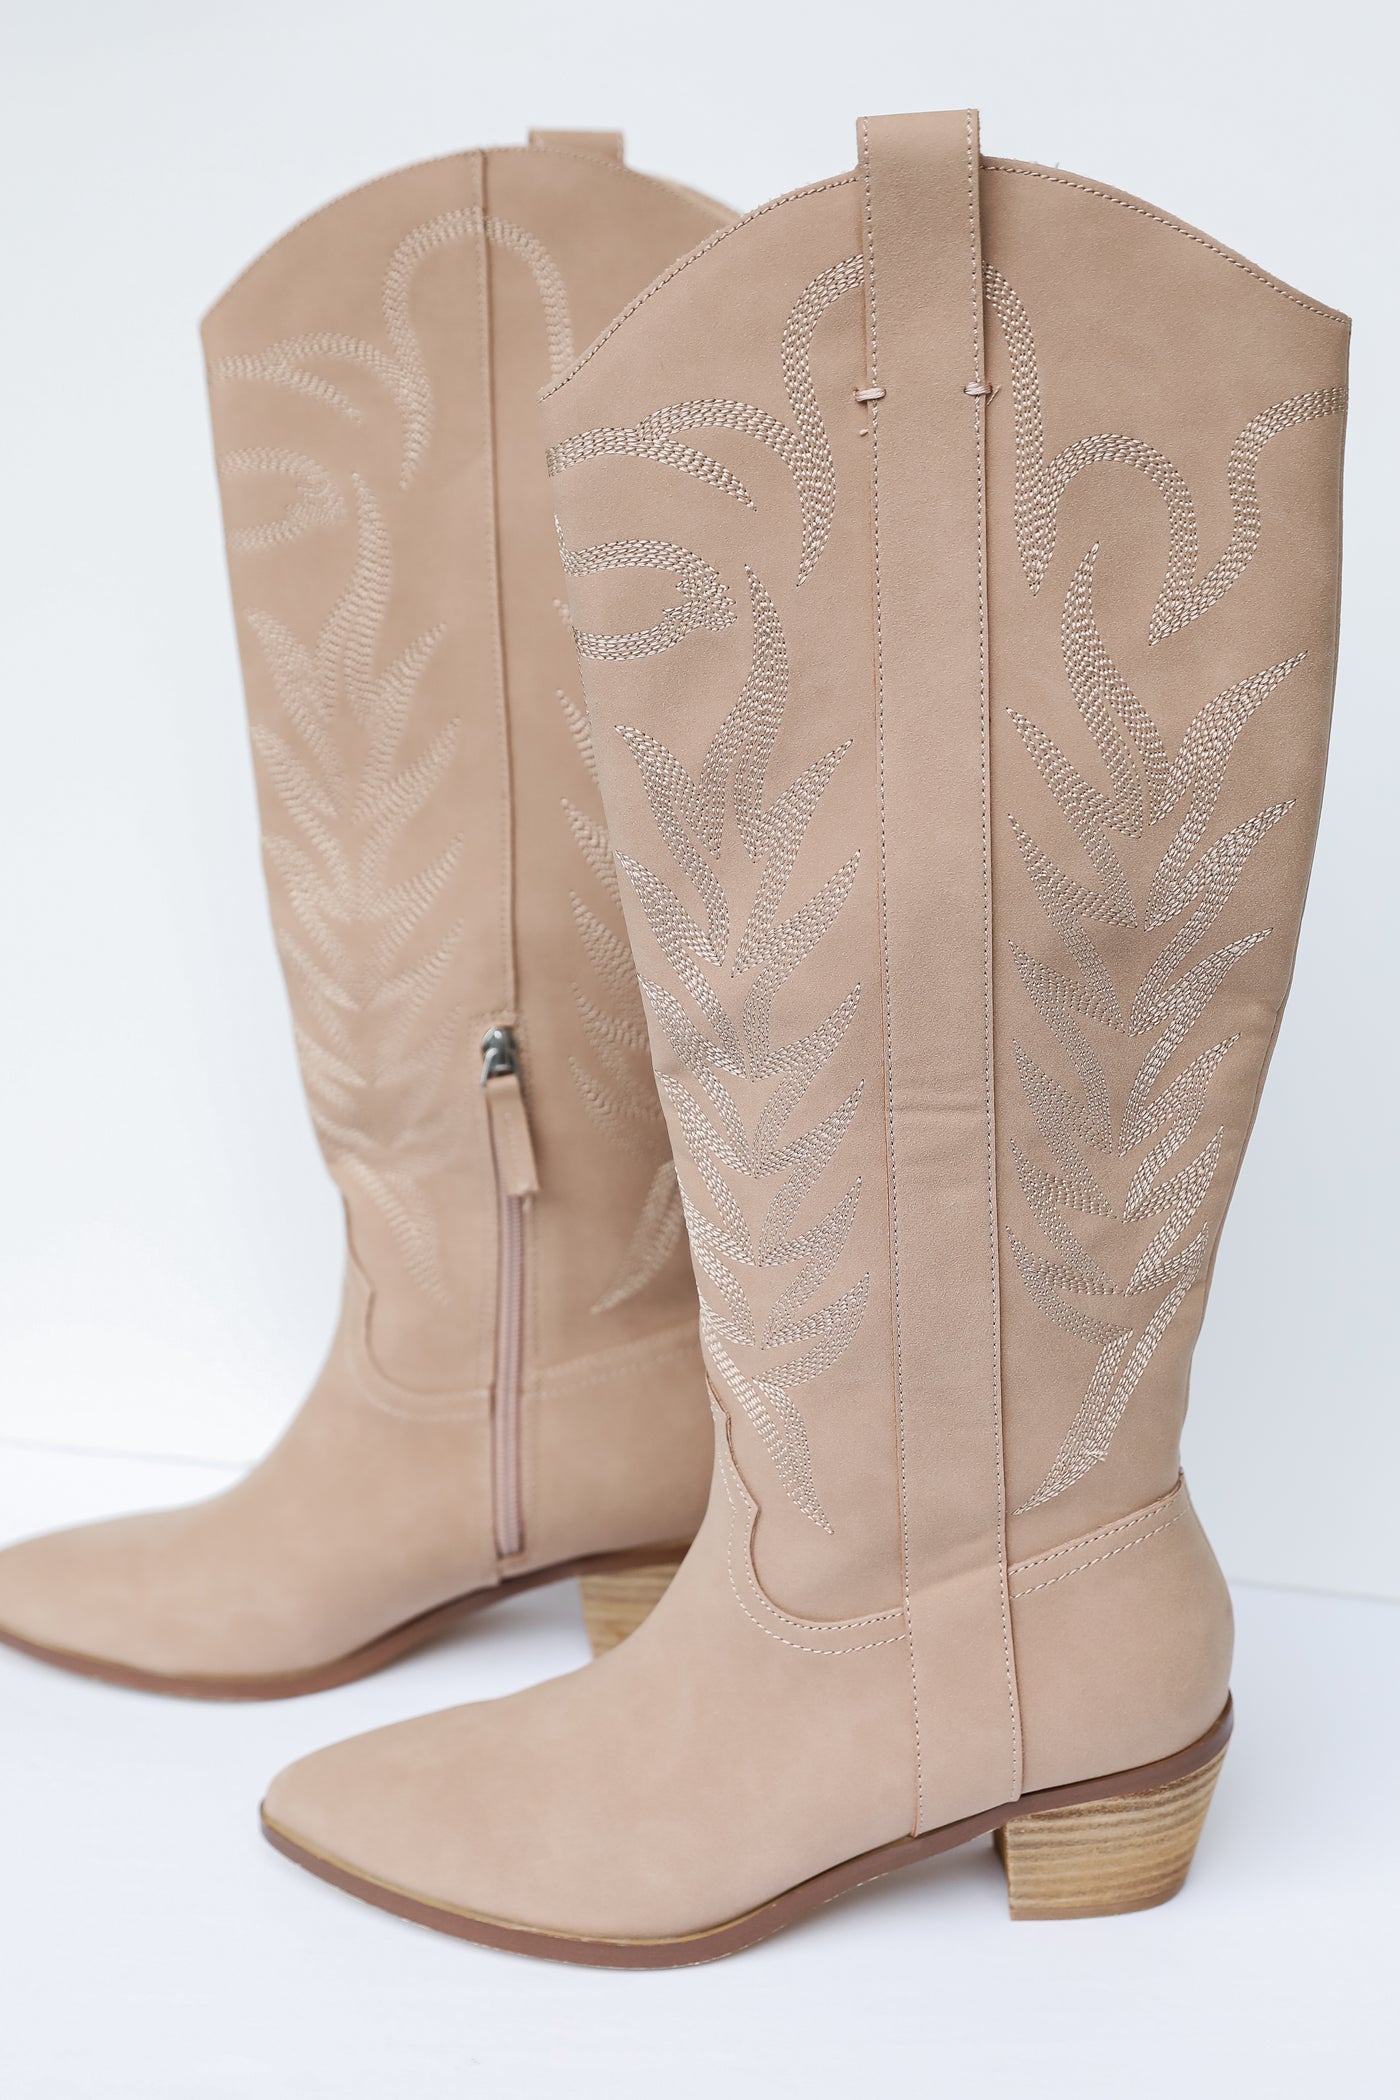 nude Western Knee High Boots side view